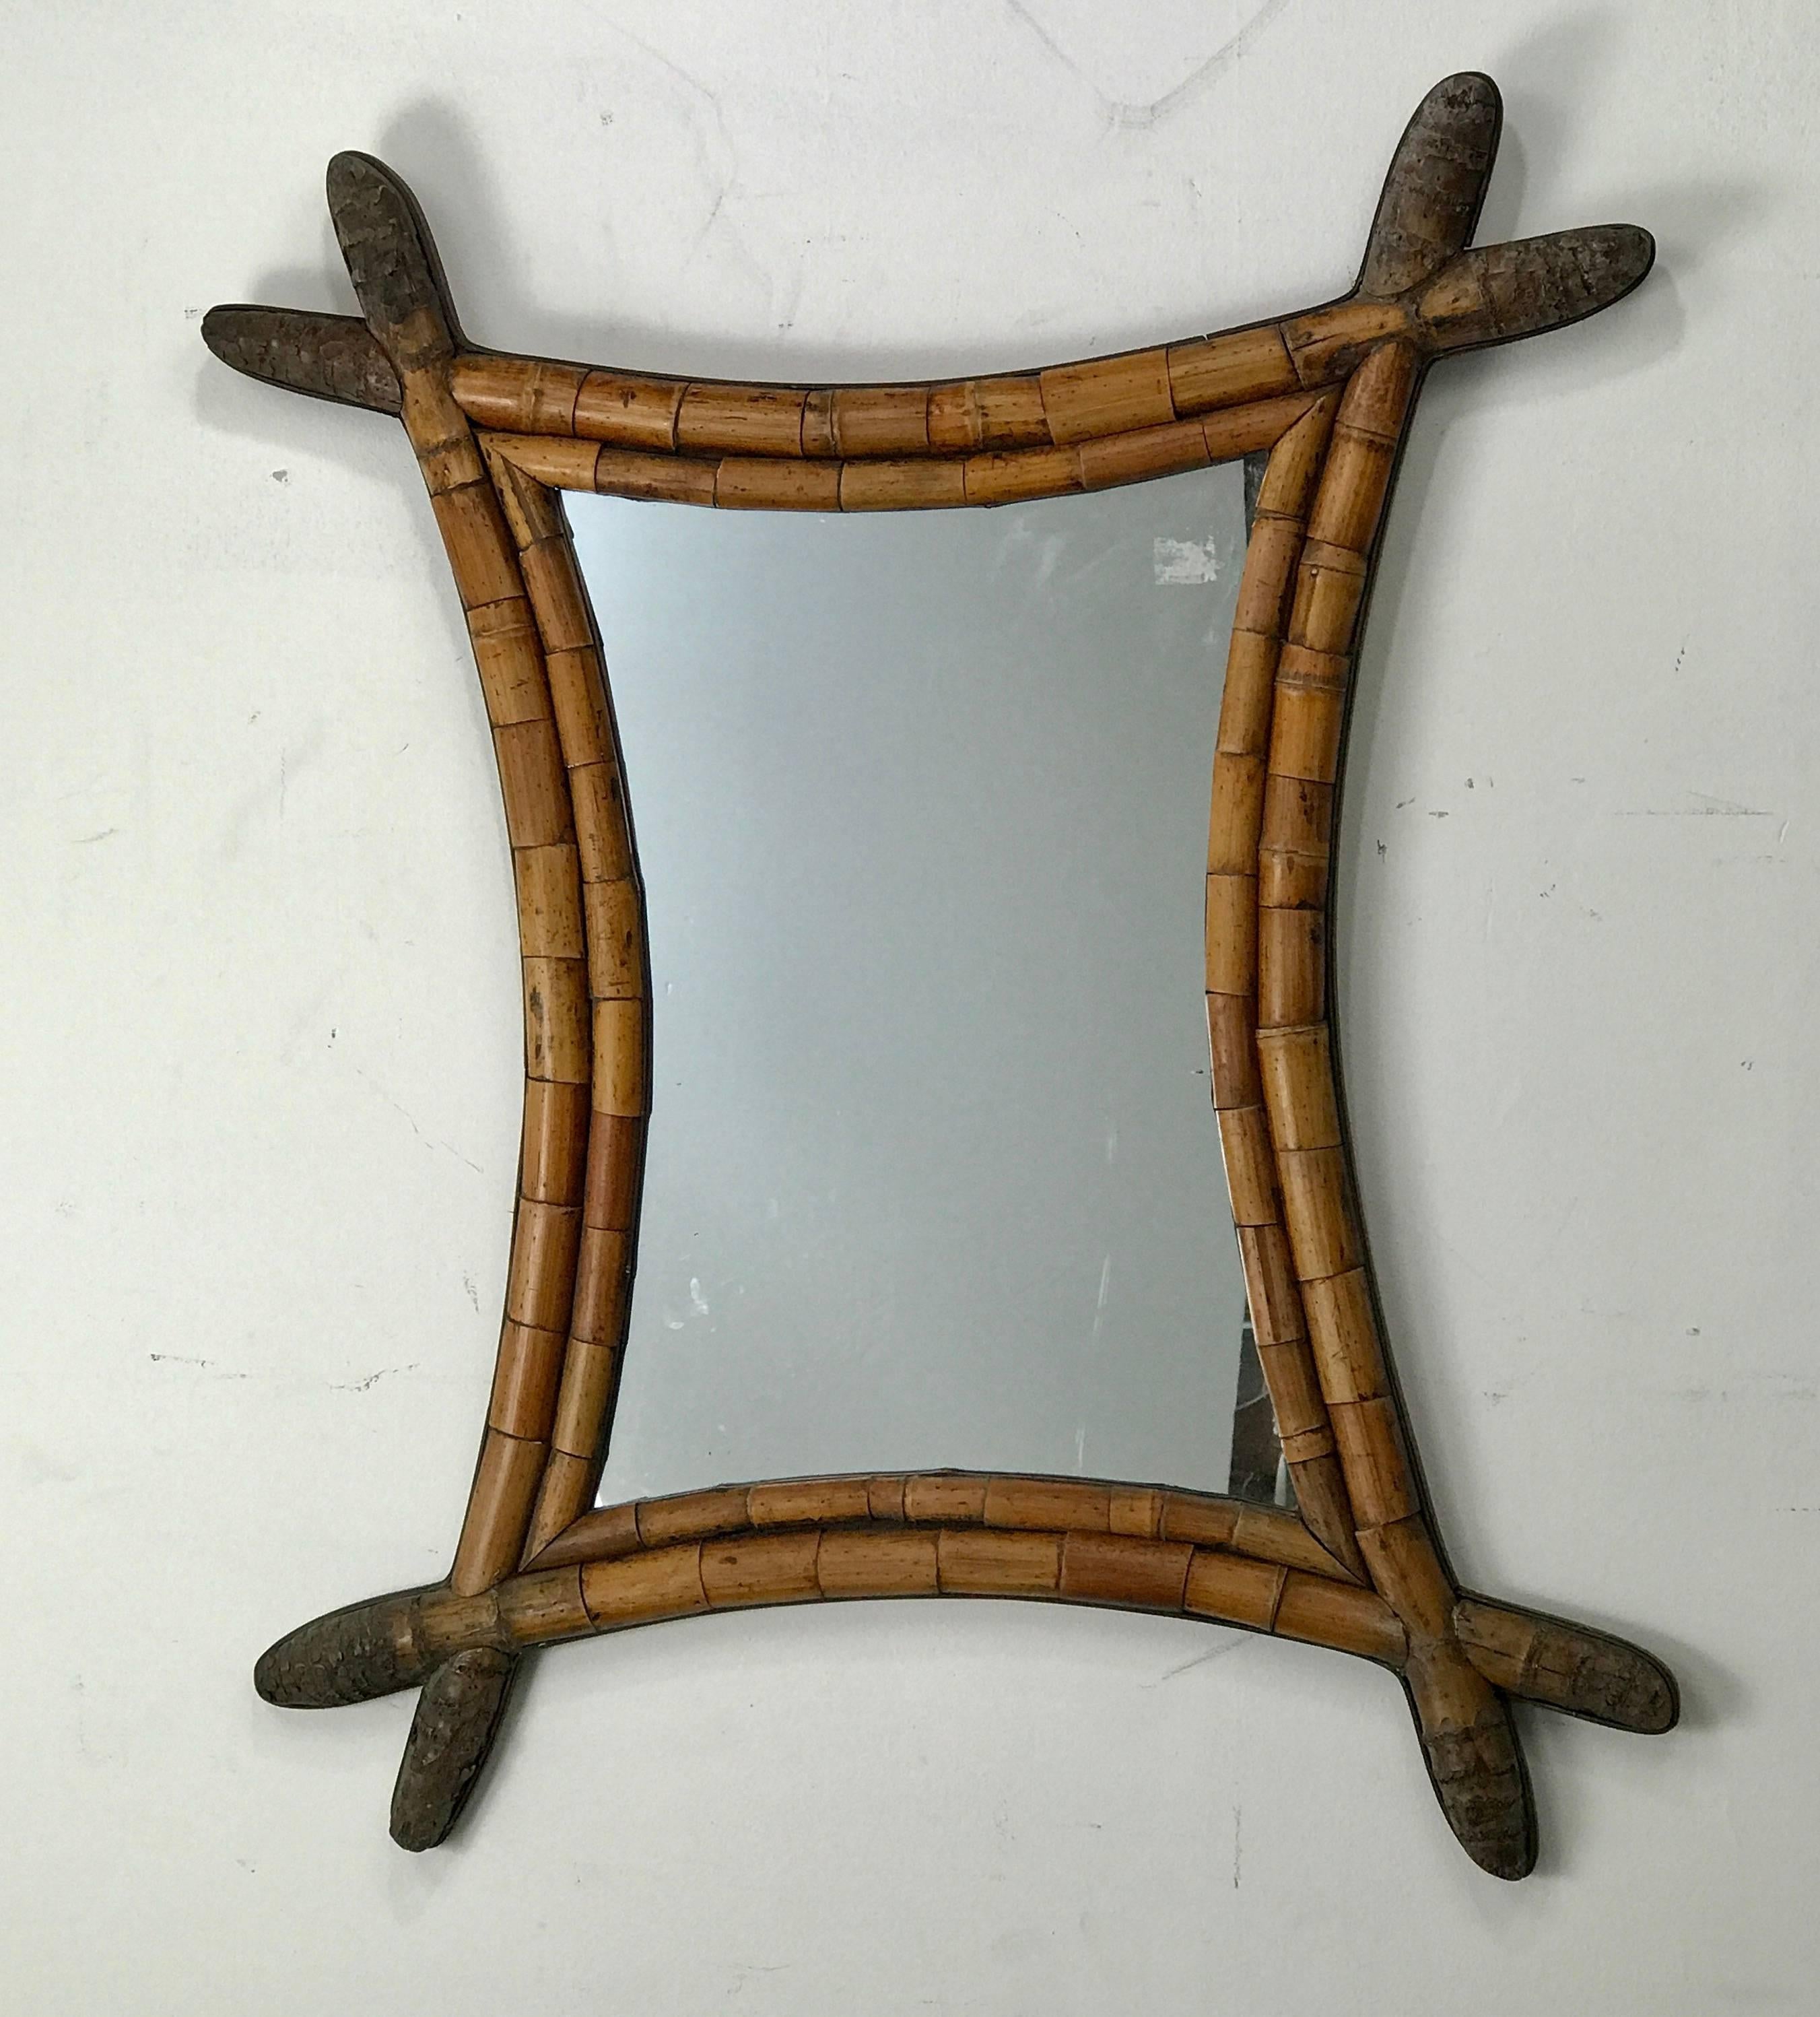 Early and unusual Asian style bamboo mirror, stunning design, wood wrapped trim. Wonderful color and surface, hang vertically or horizontally.